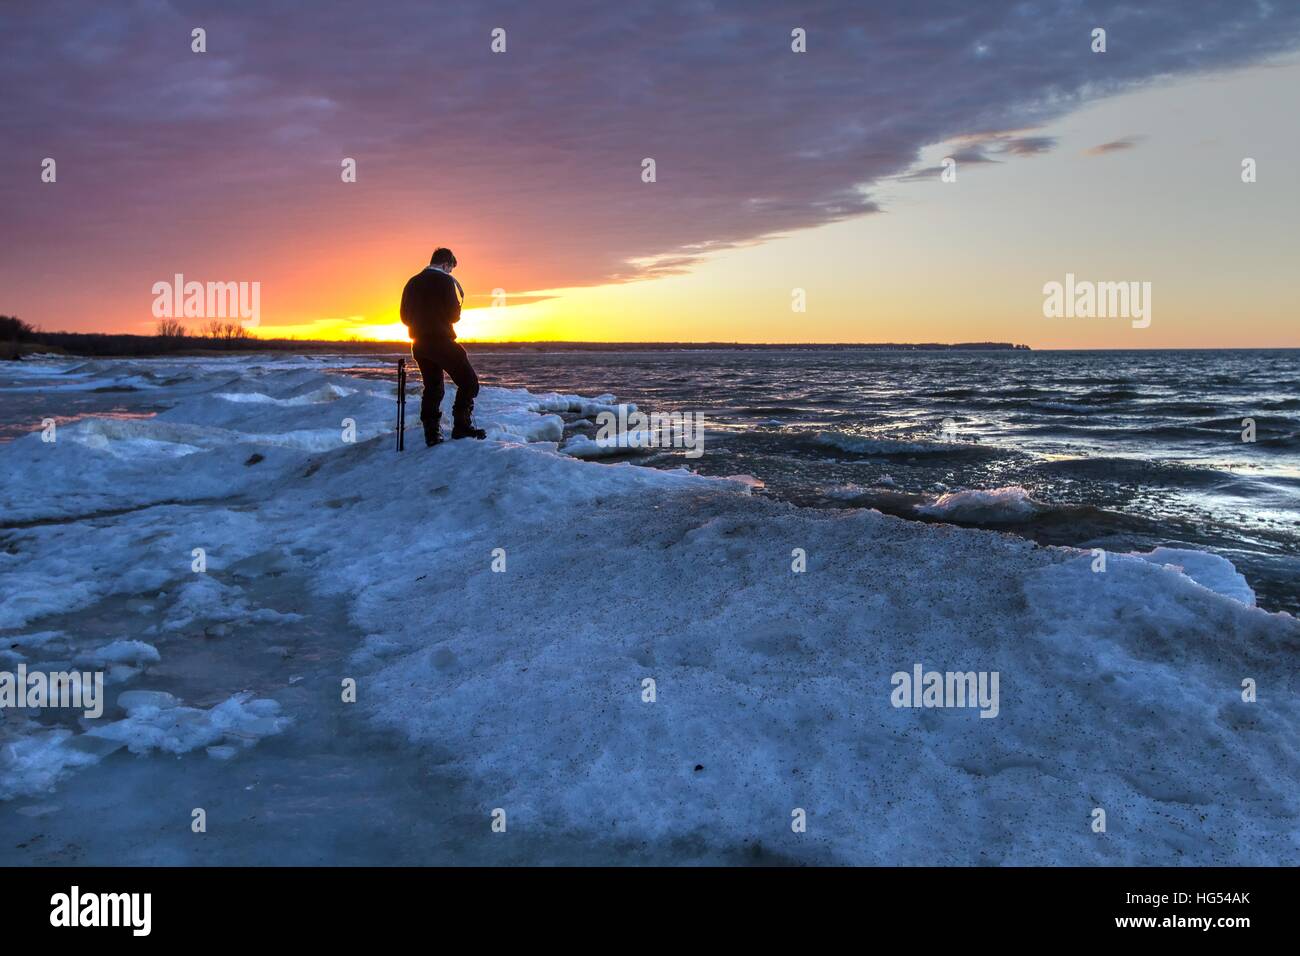 Winter Photography . Male photographer standing in the snow on the shore of a frozen lake with a sunset hoirizon. Port Austin, M Stock Photo